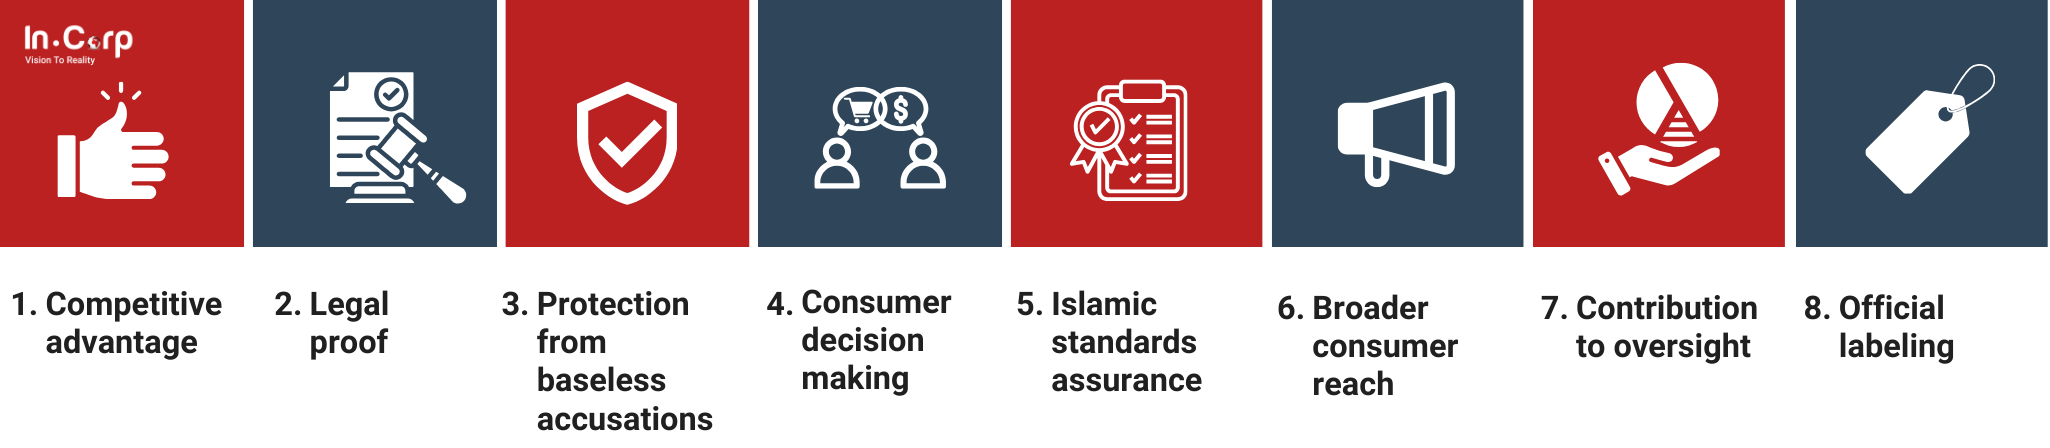 Halal certification in Indonesia: Steps and requirements